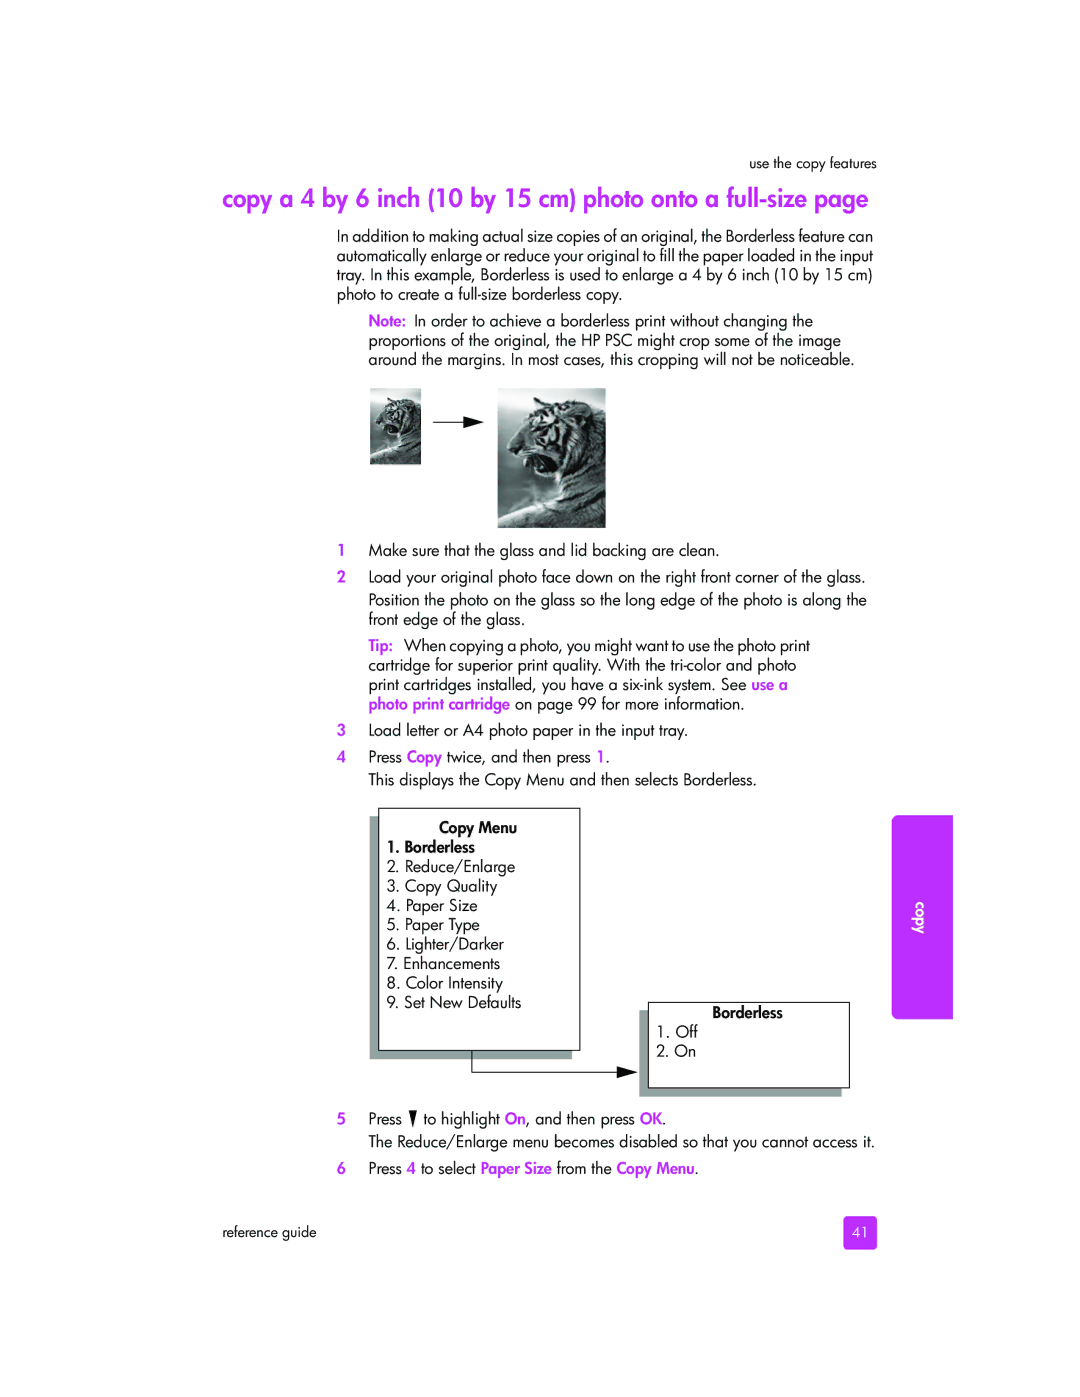 HP 2510xi manual Copy a 4 by 6 inch 10 by 15 cm photo onto a full-size, Off 